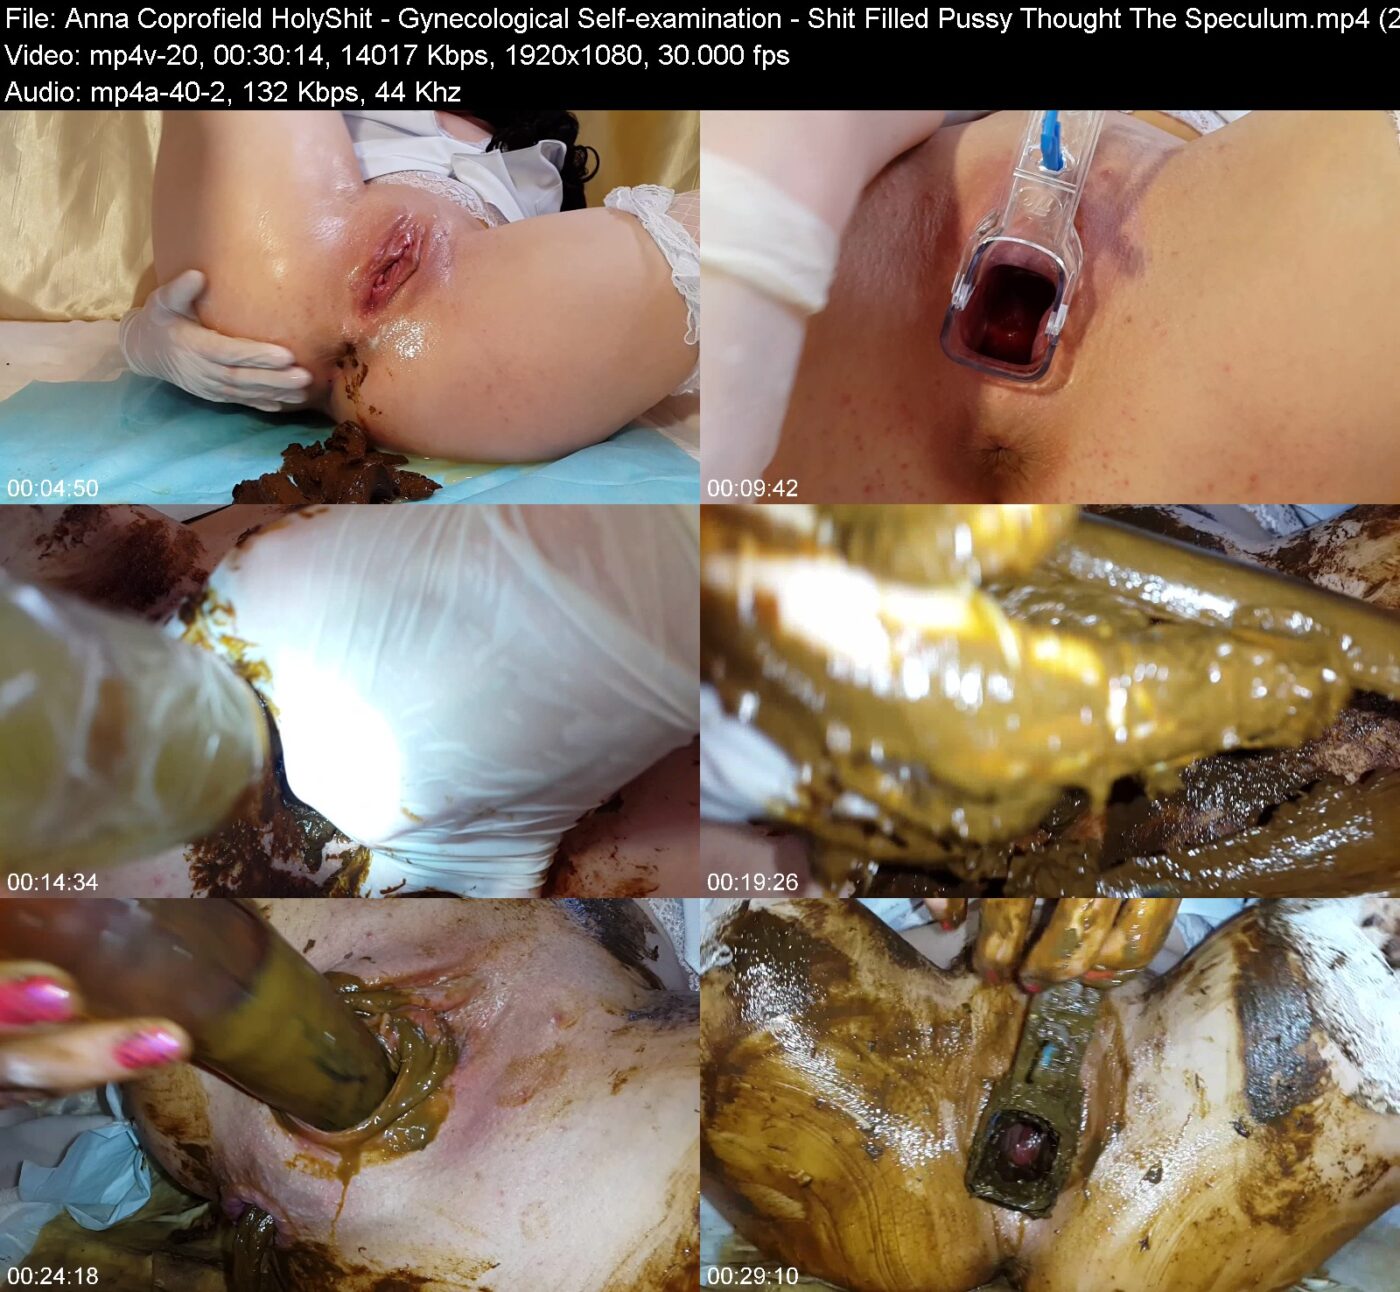 Actress: Anna Coprofield HolyShit. Title and Studio: Gynecological Self-examination – Shit Filled Pussy Thought The Speculum